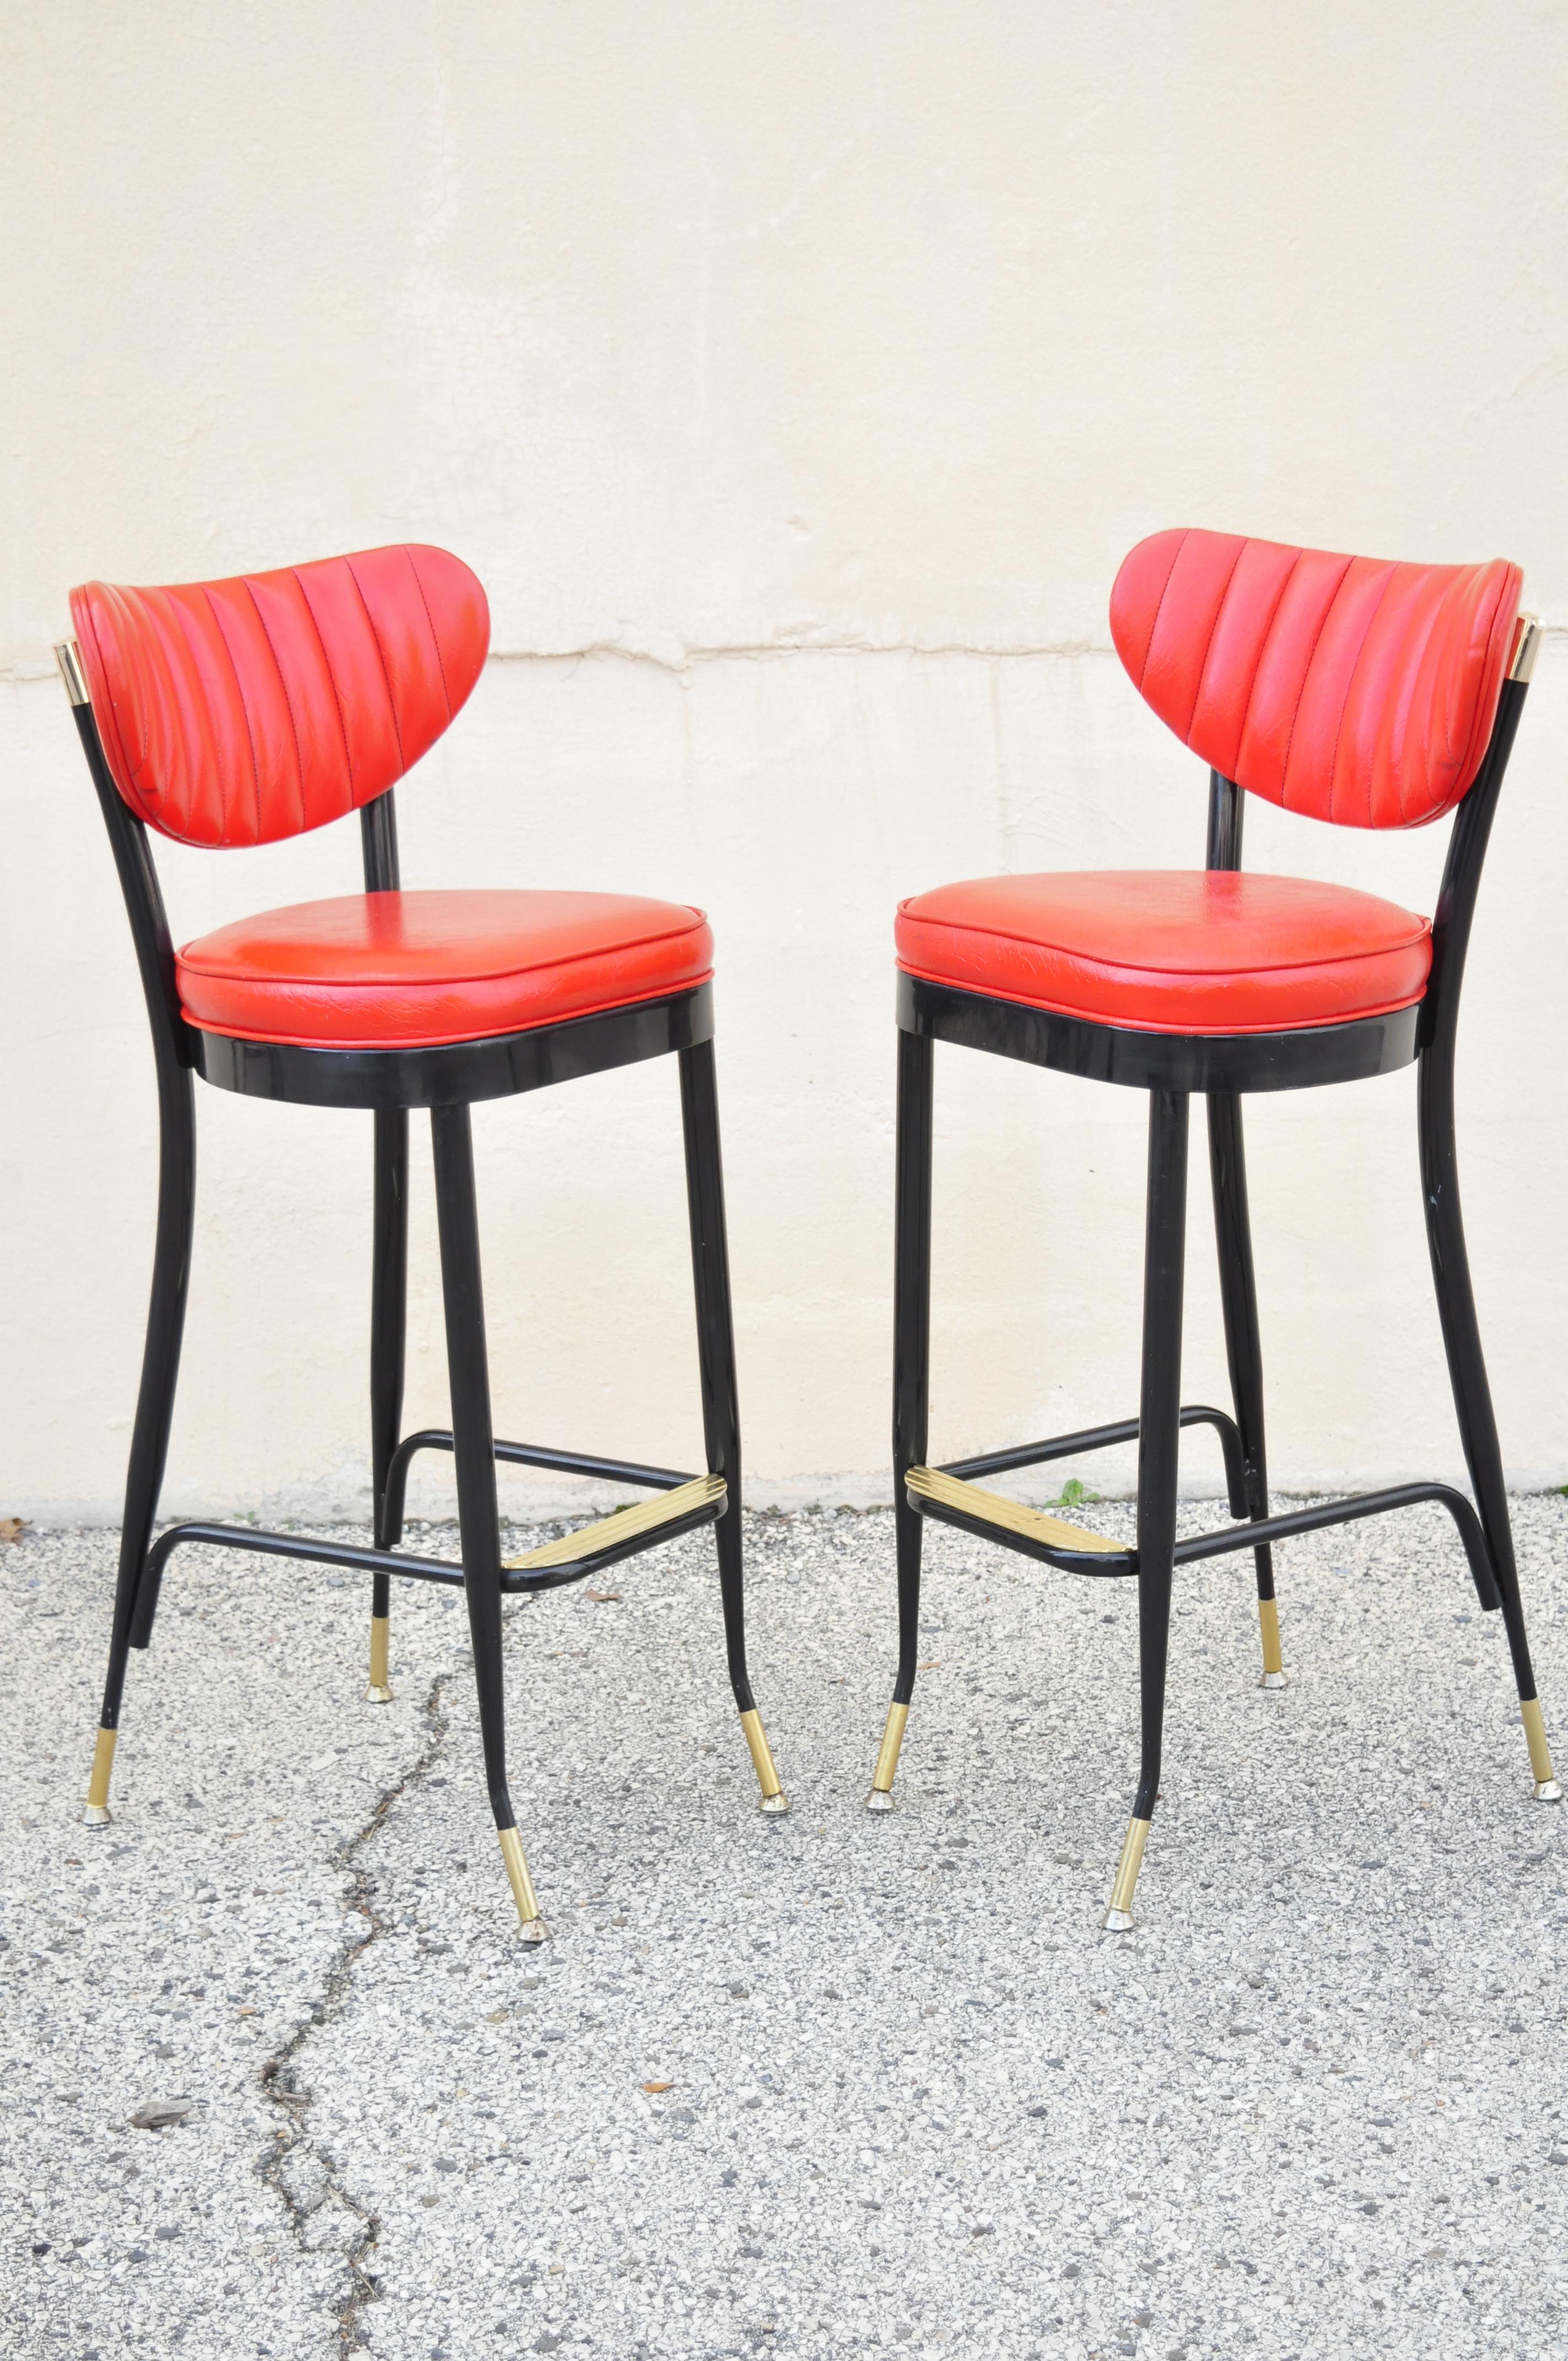 Vintage midcentury lion brand black metal red vinyl Italian style barstools, Set of 3. Item features red vinyl upholstery, metal frame, original labels, tapered legs, clean modernist lines, quality American craftsmanship, great style and form, circa